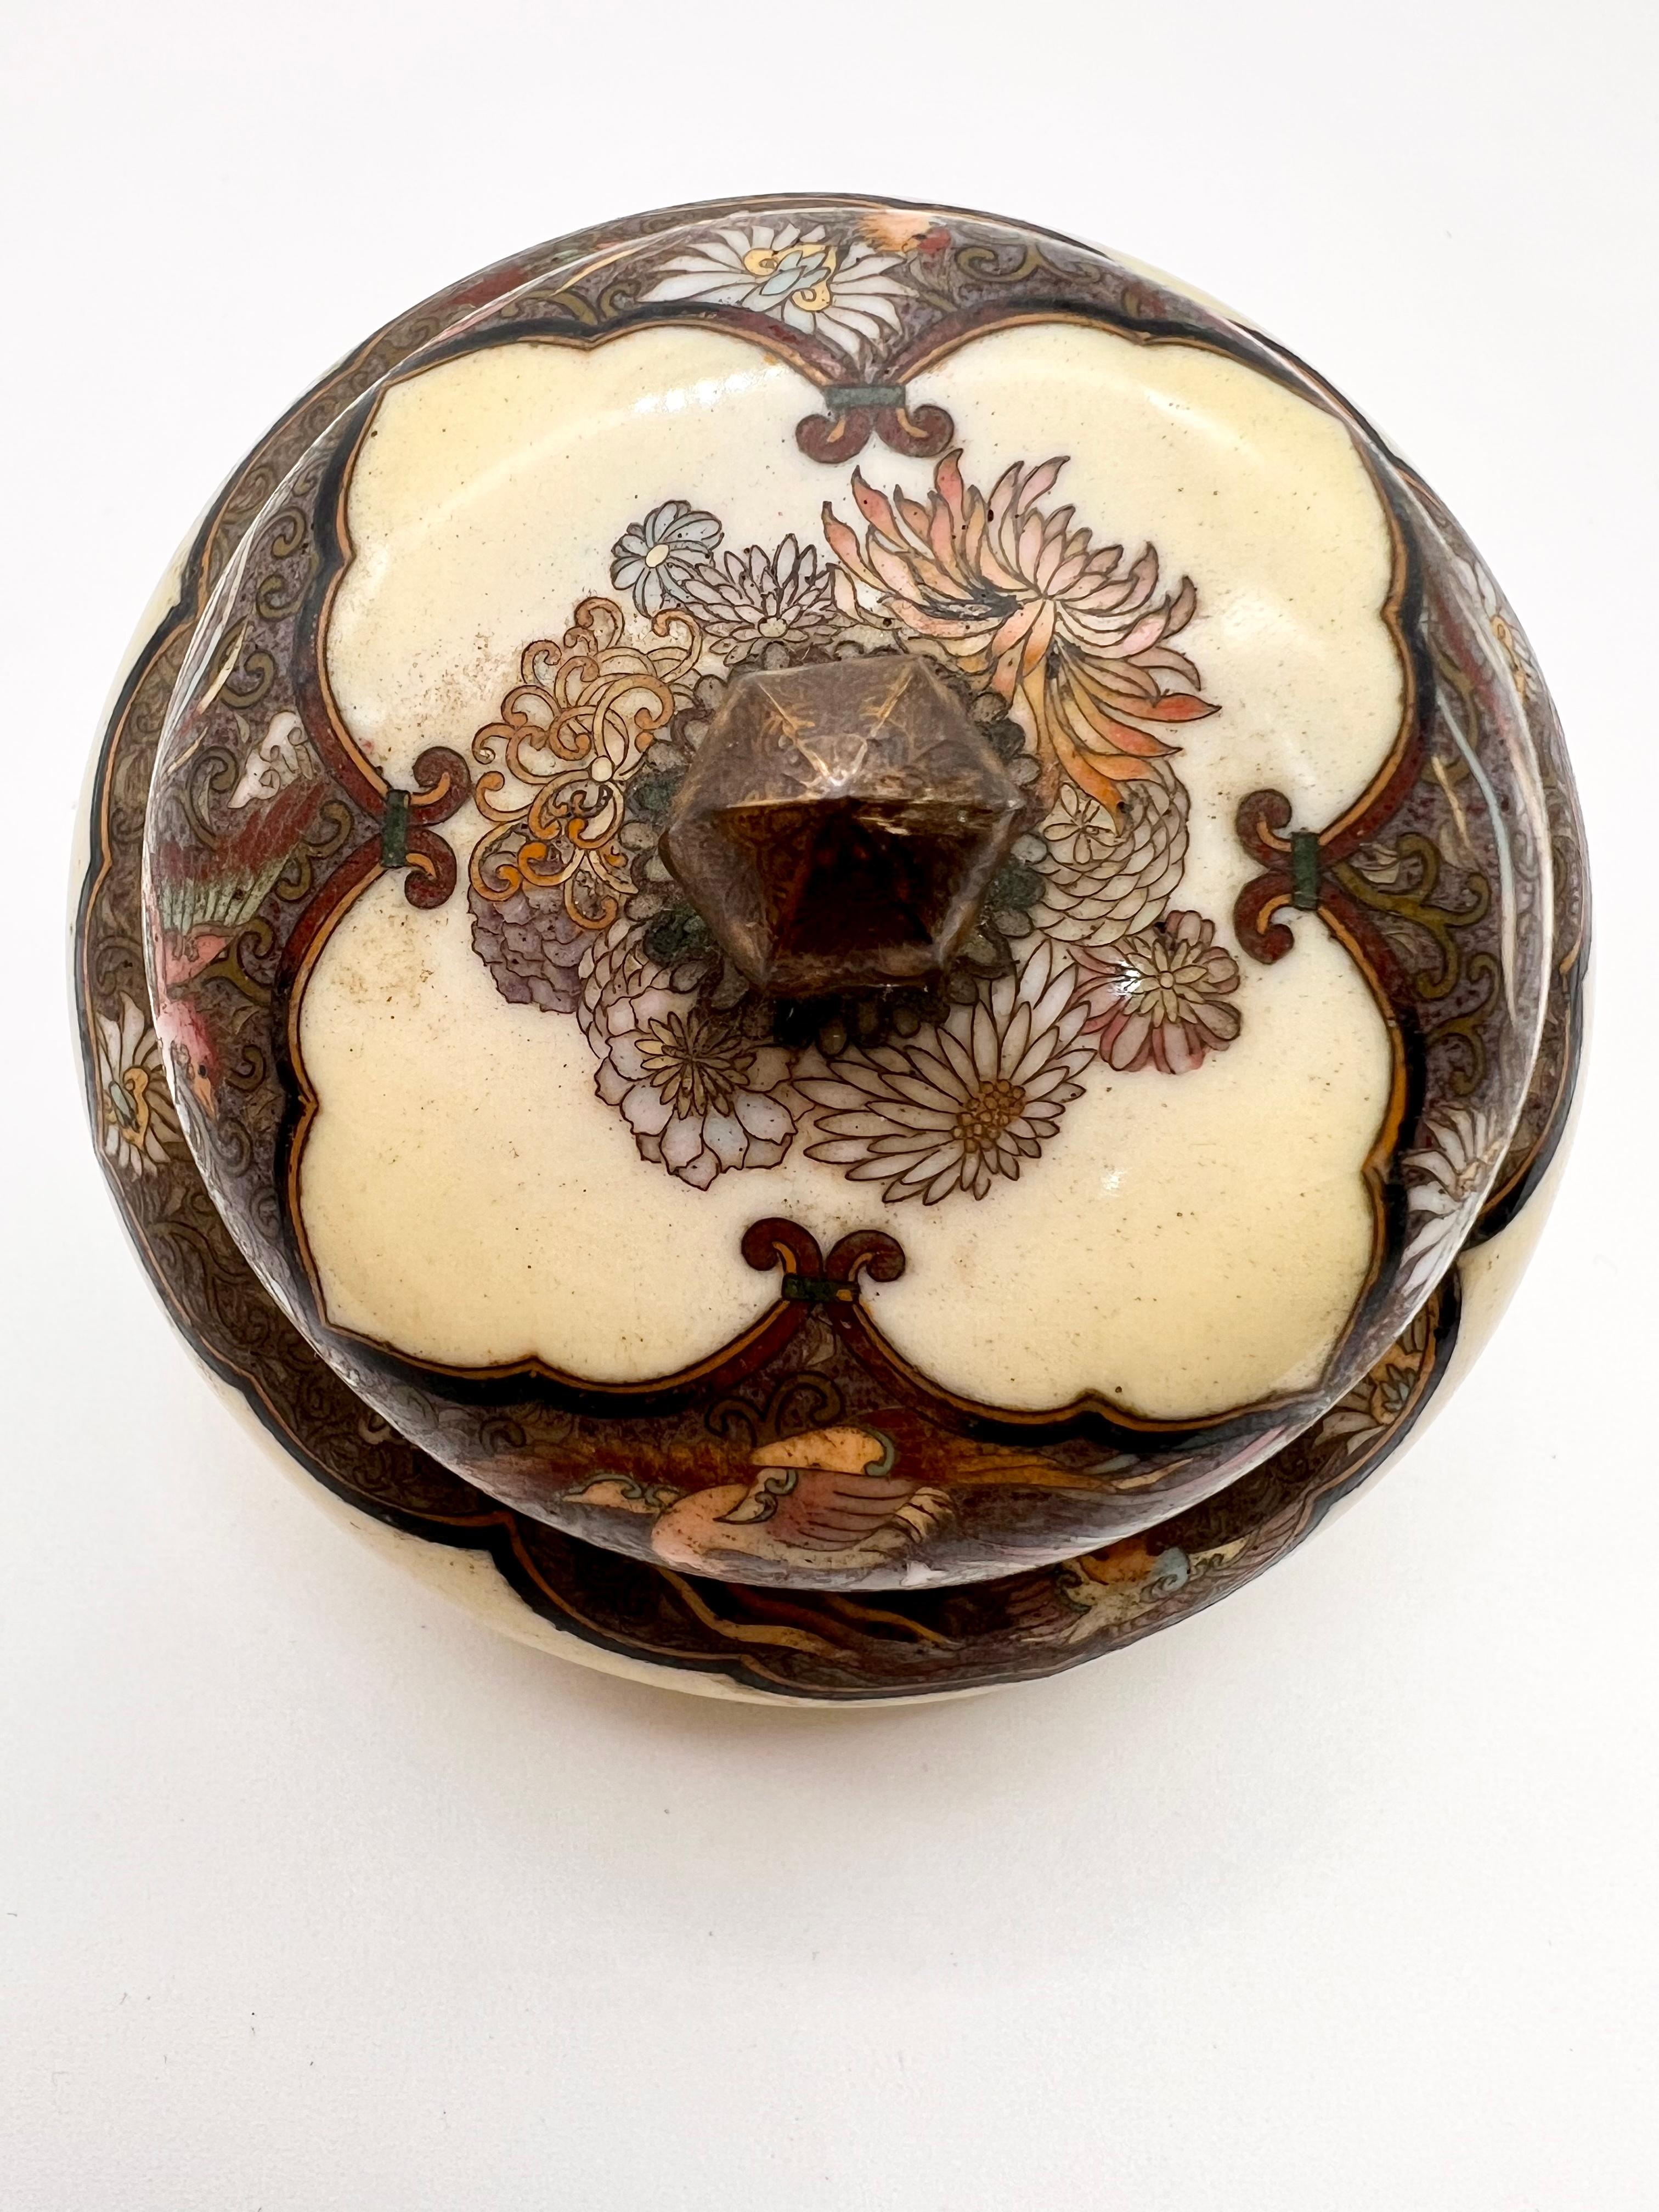 Exquisite Cloisonné Enamel Vase and Cover in the Manner of Namikawa Yasuyuki For Sale 8